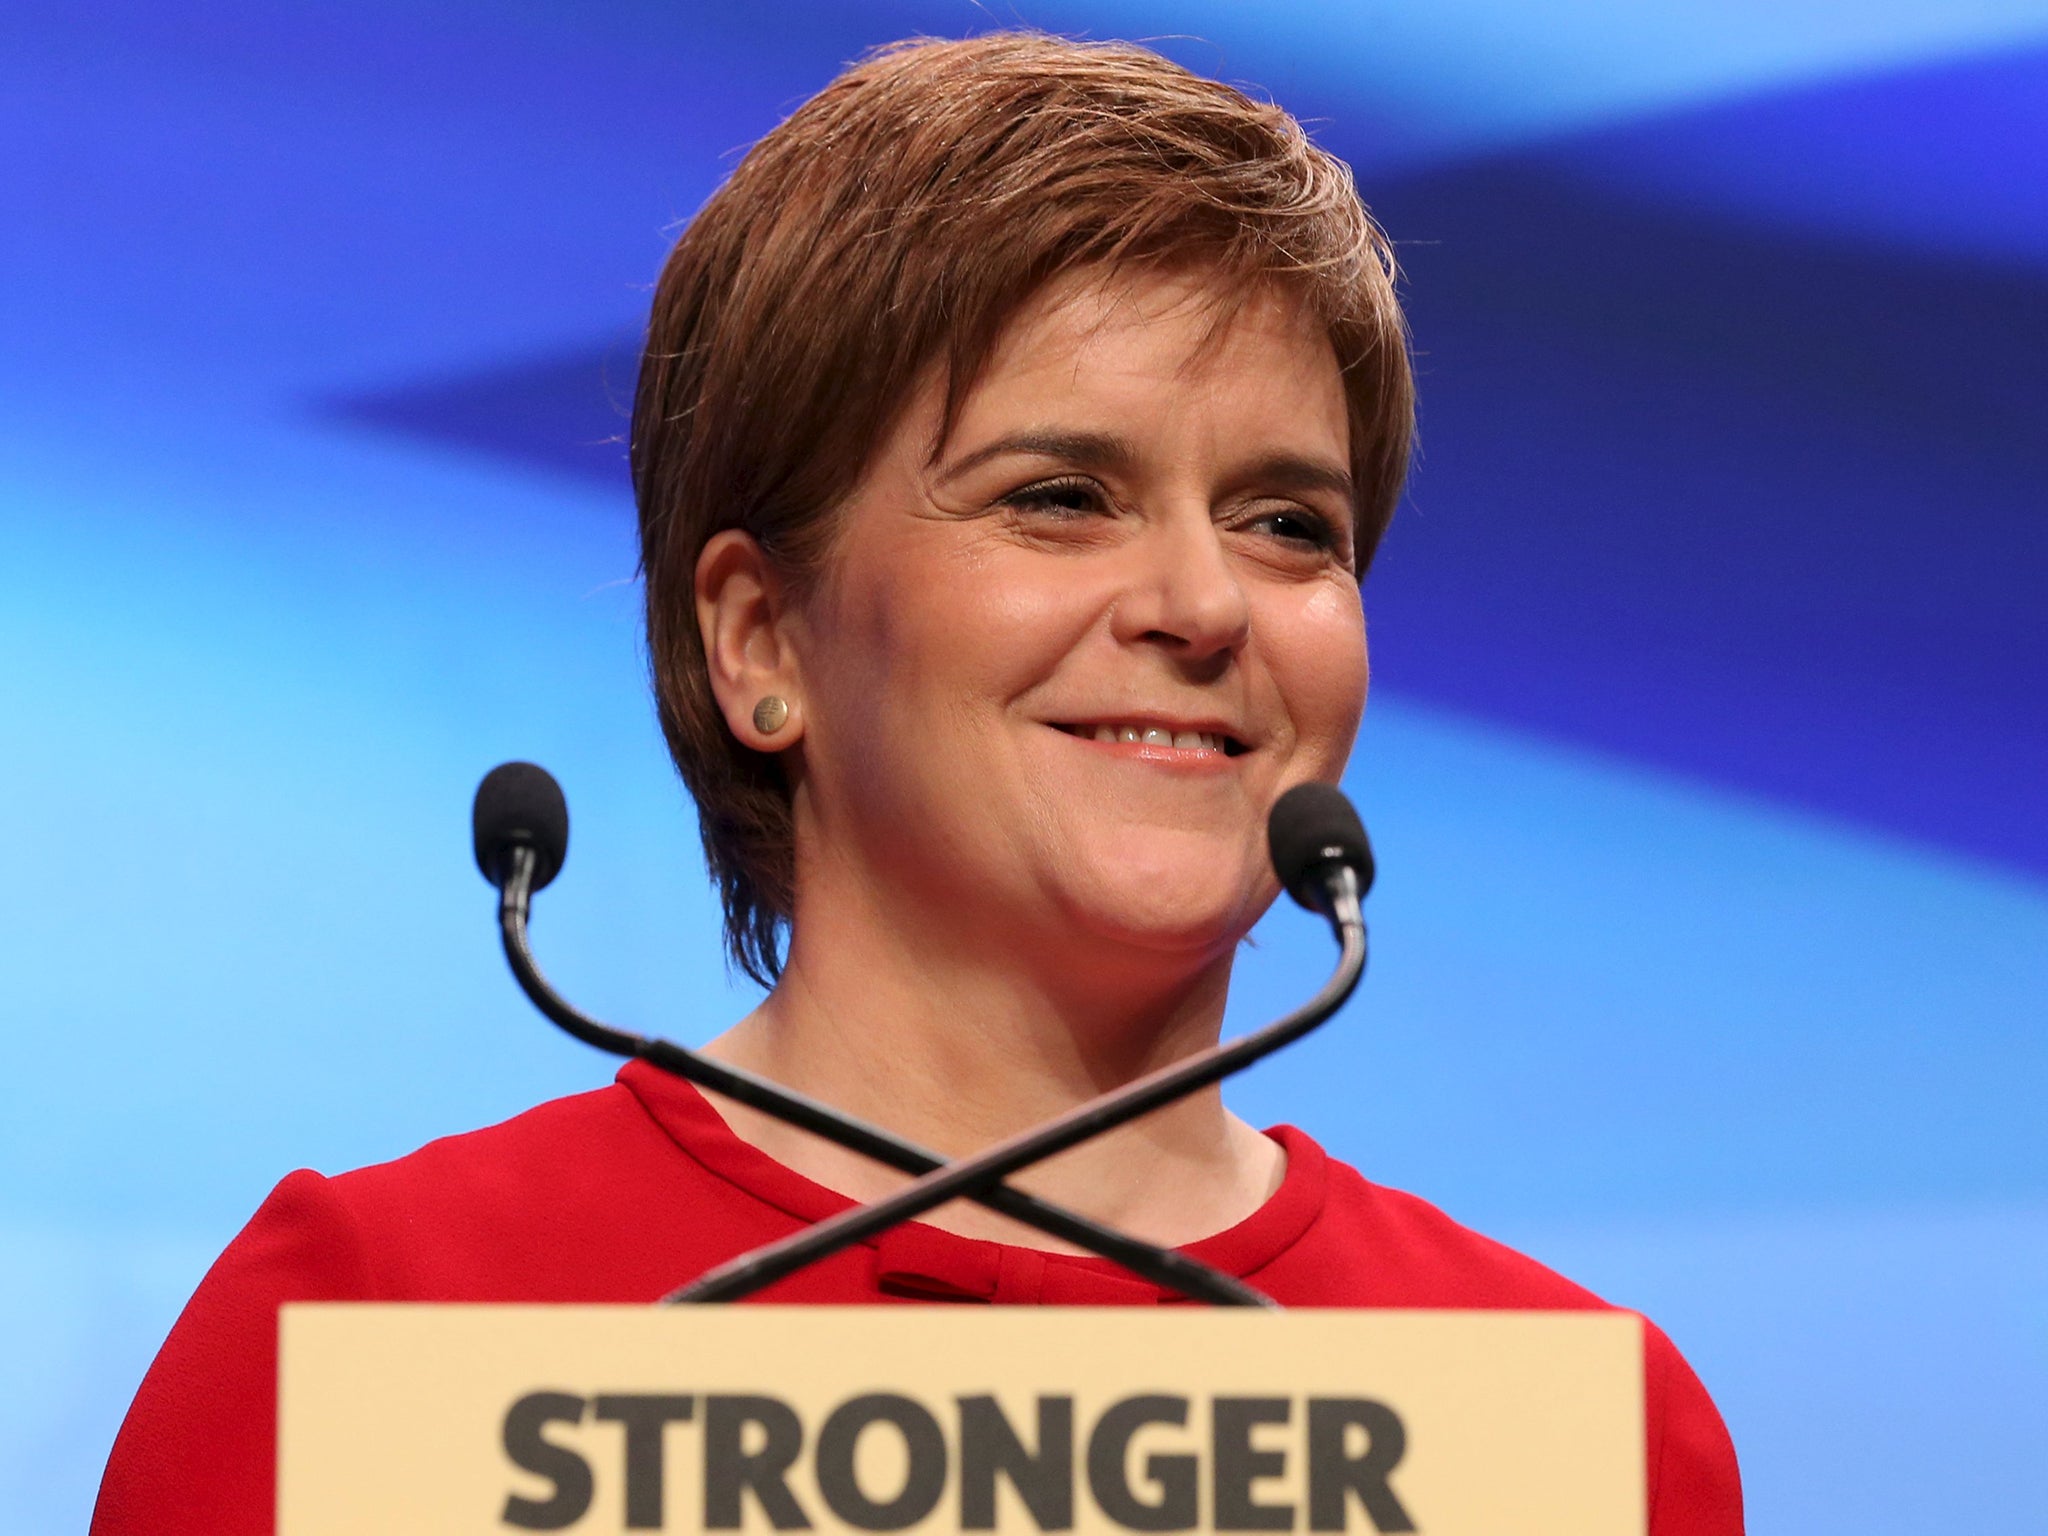 Ms Sturgeon accused the Prime Minister of being 'pig-headed' in his approach to Scotland